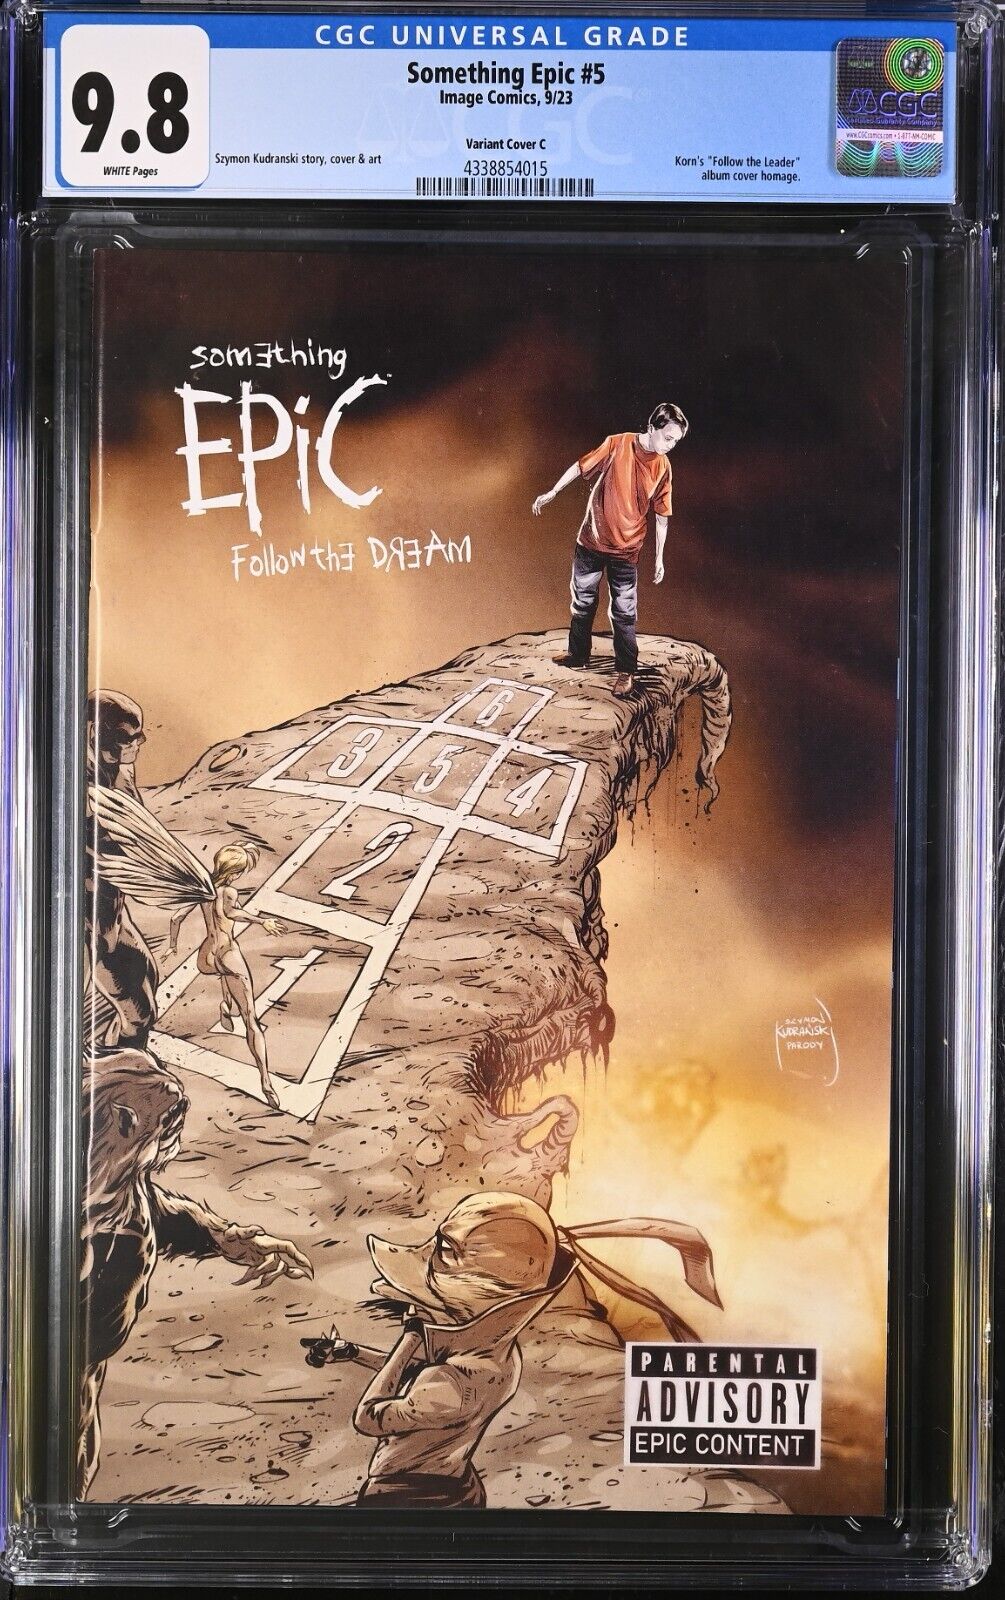 Something Epic #5 CGC 9.8 Korn Follow the Leader CD Cover Homage Image 2023